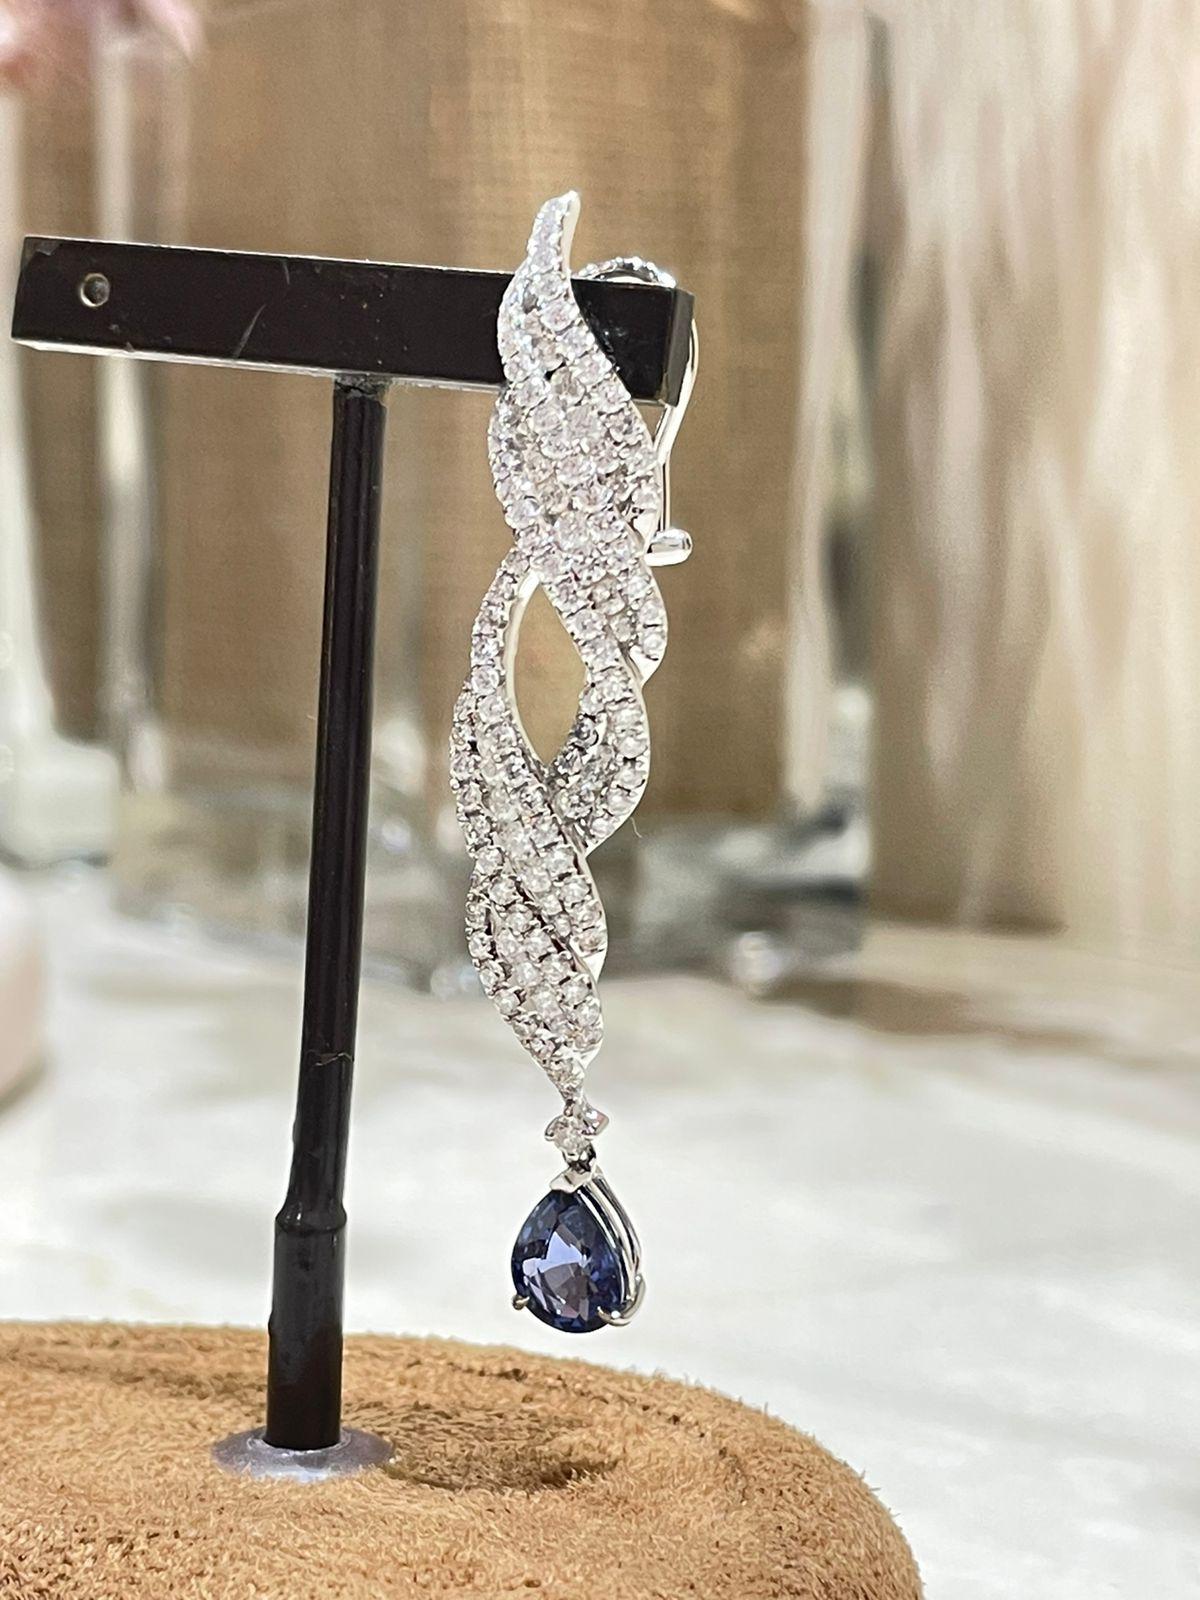 These dangling earrings exude sophistication and elegance with a perfect balance of simplicity and opulence. A striking blue sapphire takes the stage adorned with exquisitely round-cut diamonds. The design ensures a reflection of light and glamour